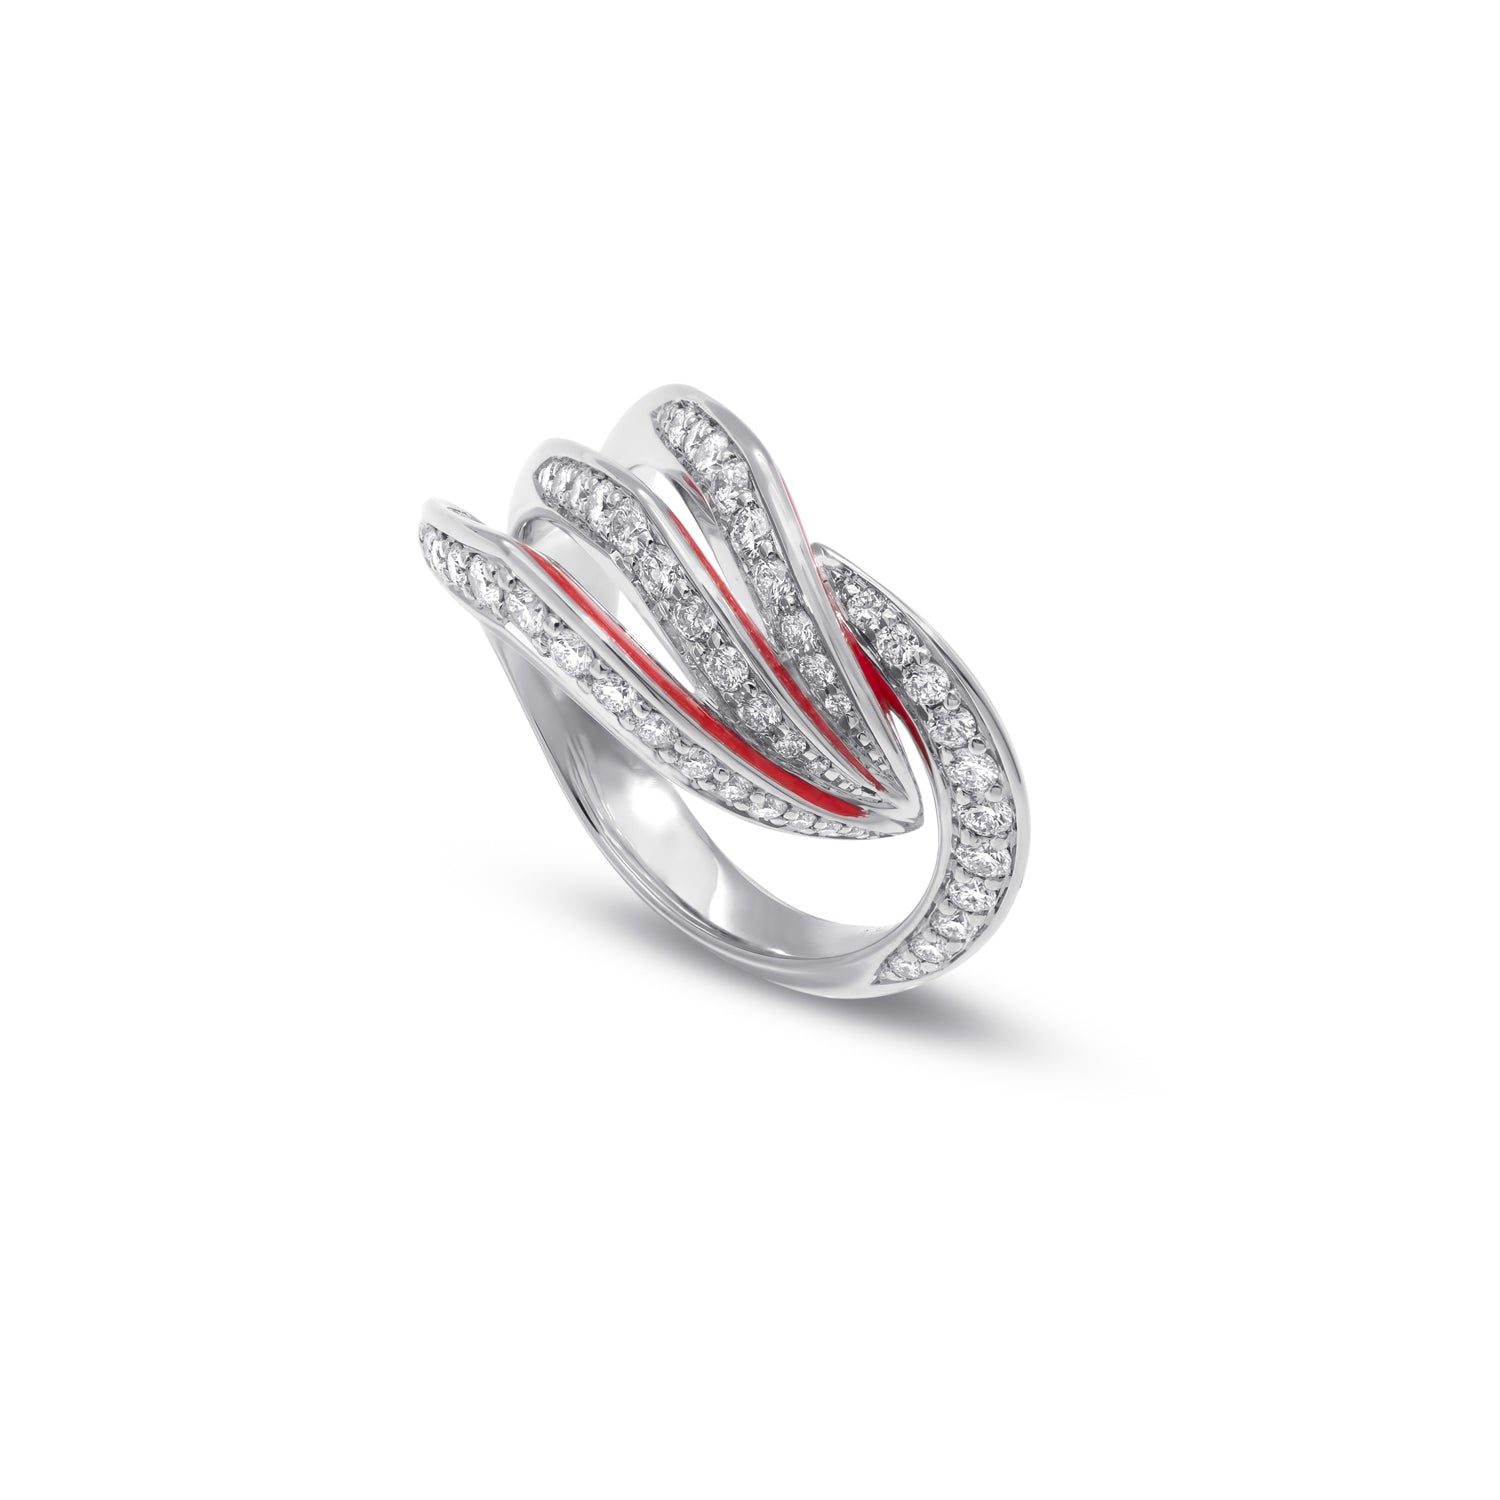 VIVA Ring with Diamonds and Red Enamel